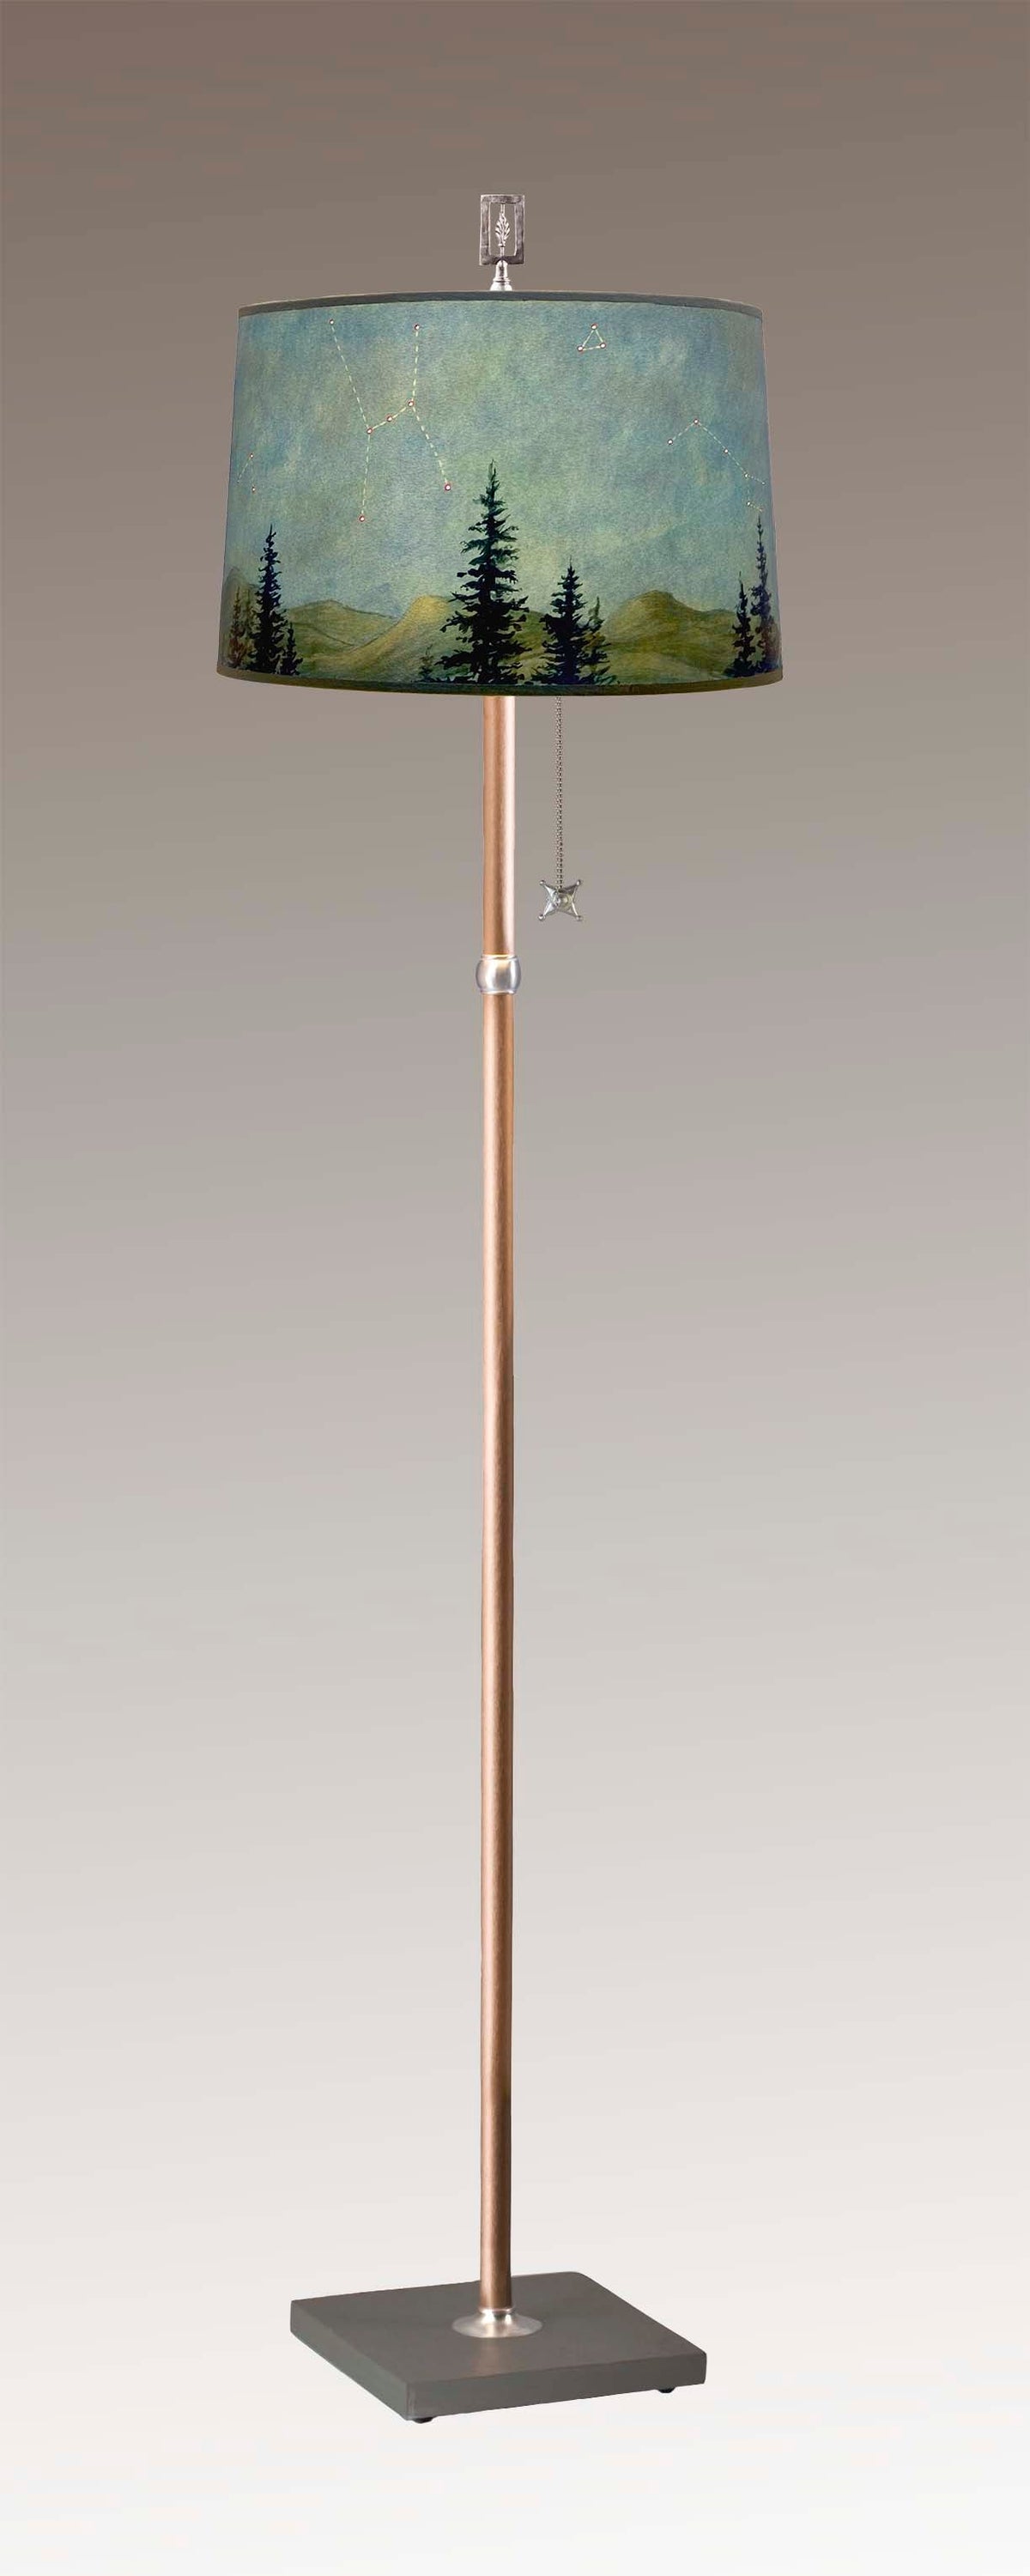 Copper Floor Lamp with Large Drum Shade in Midnight Sky